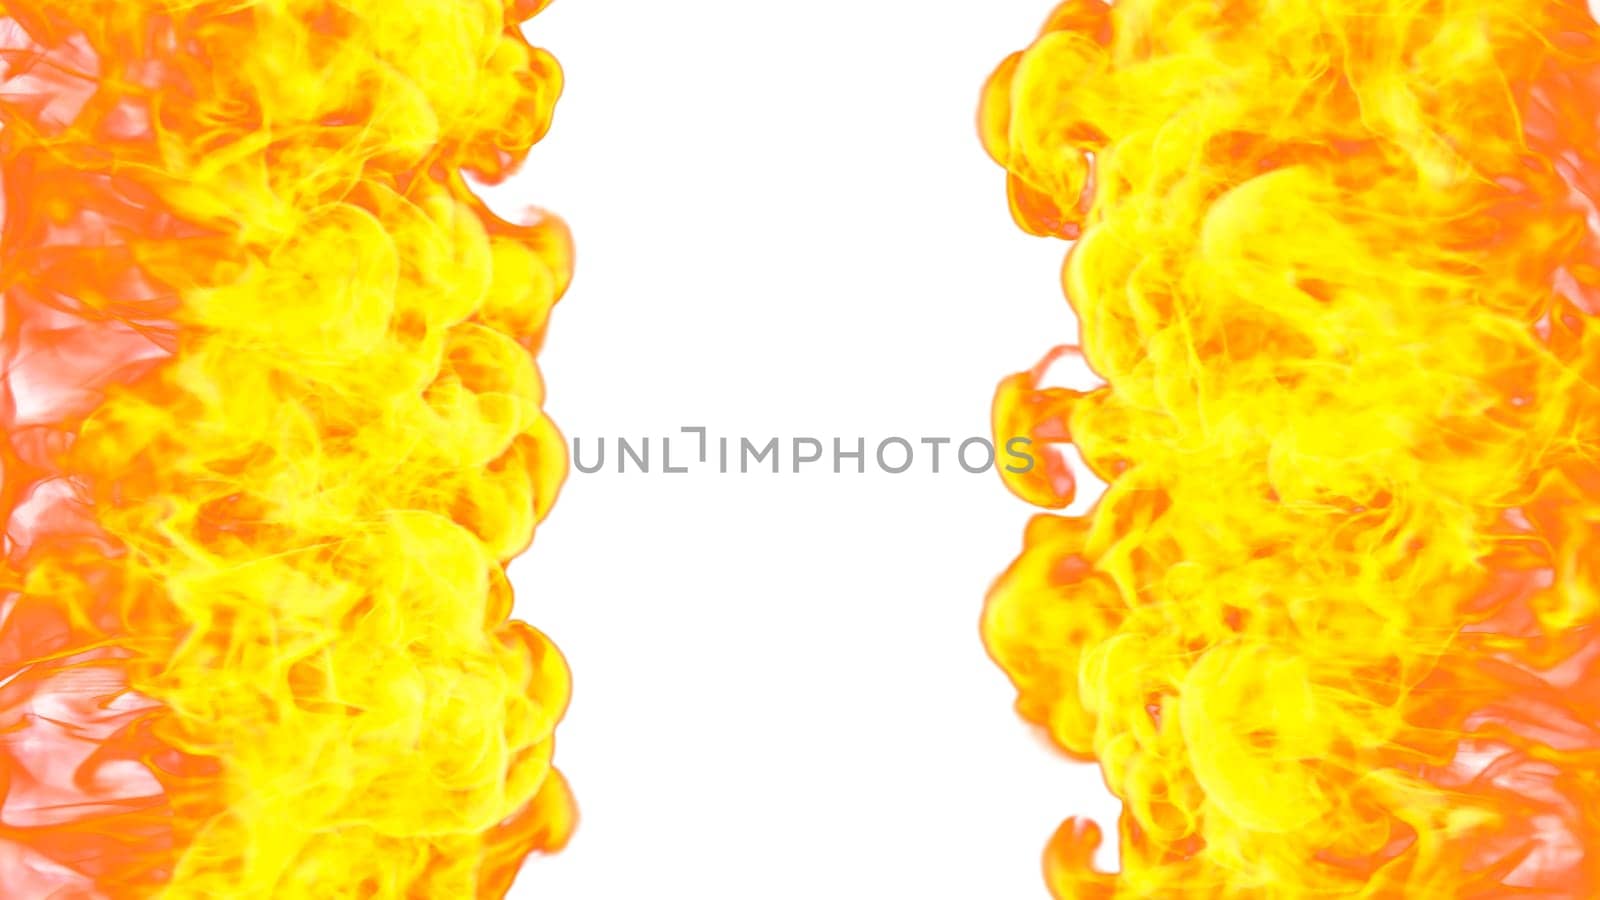 3d illustration. Tongues of flame from two sides on a white background